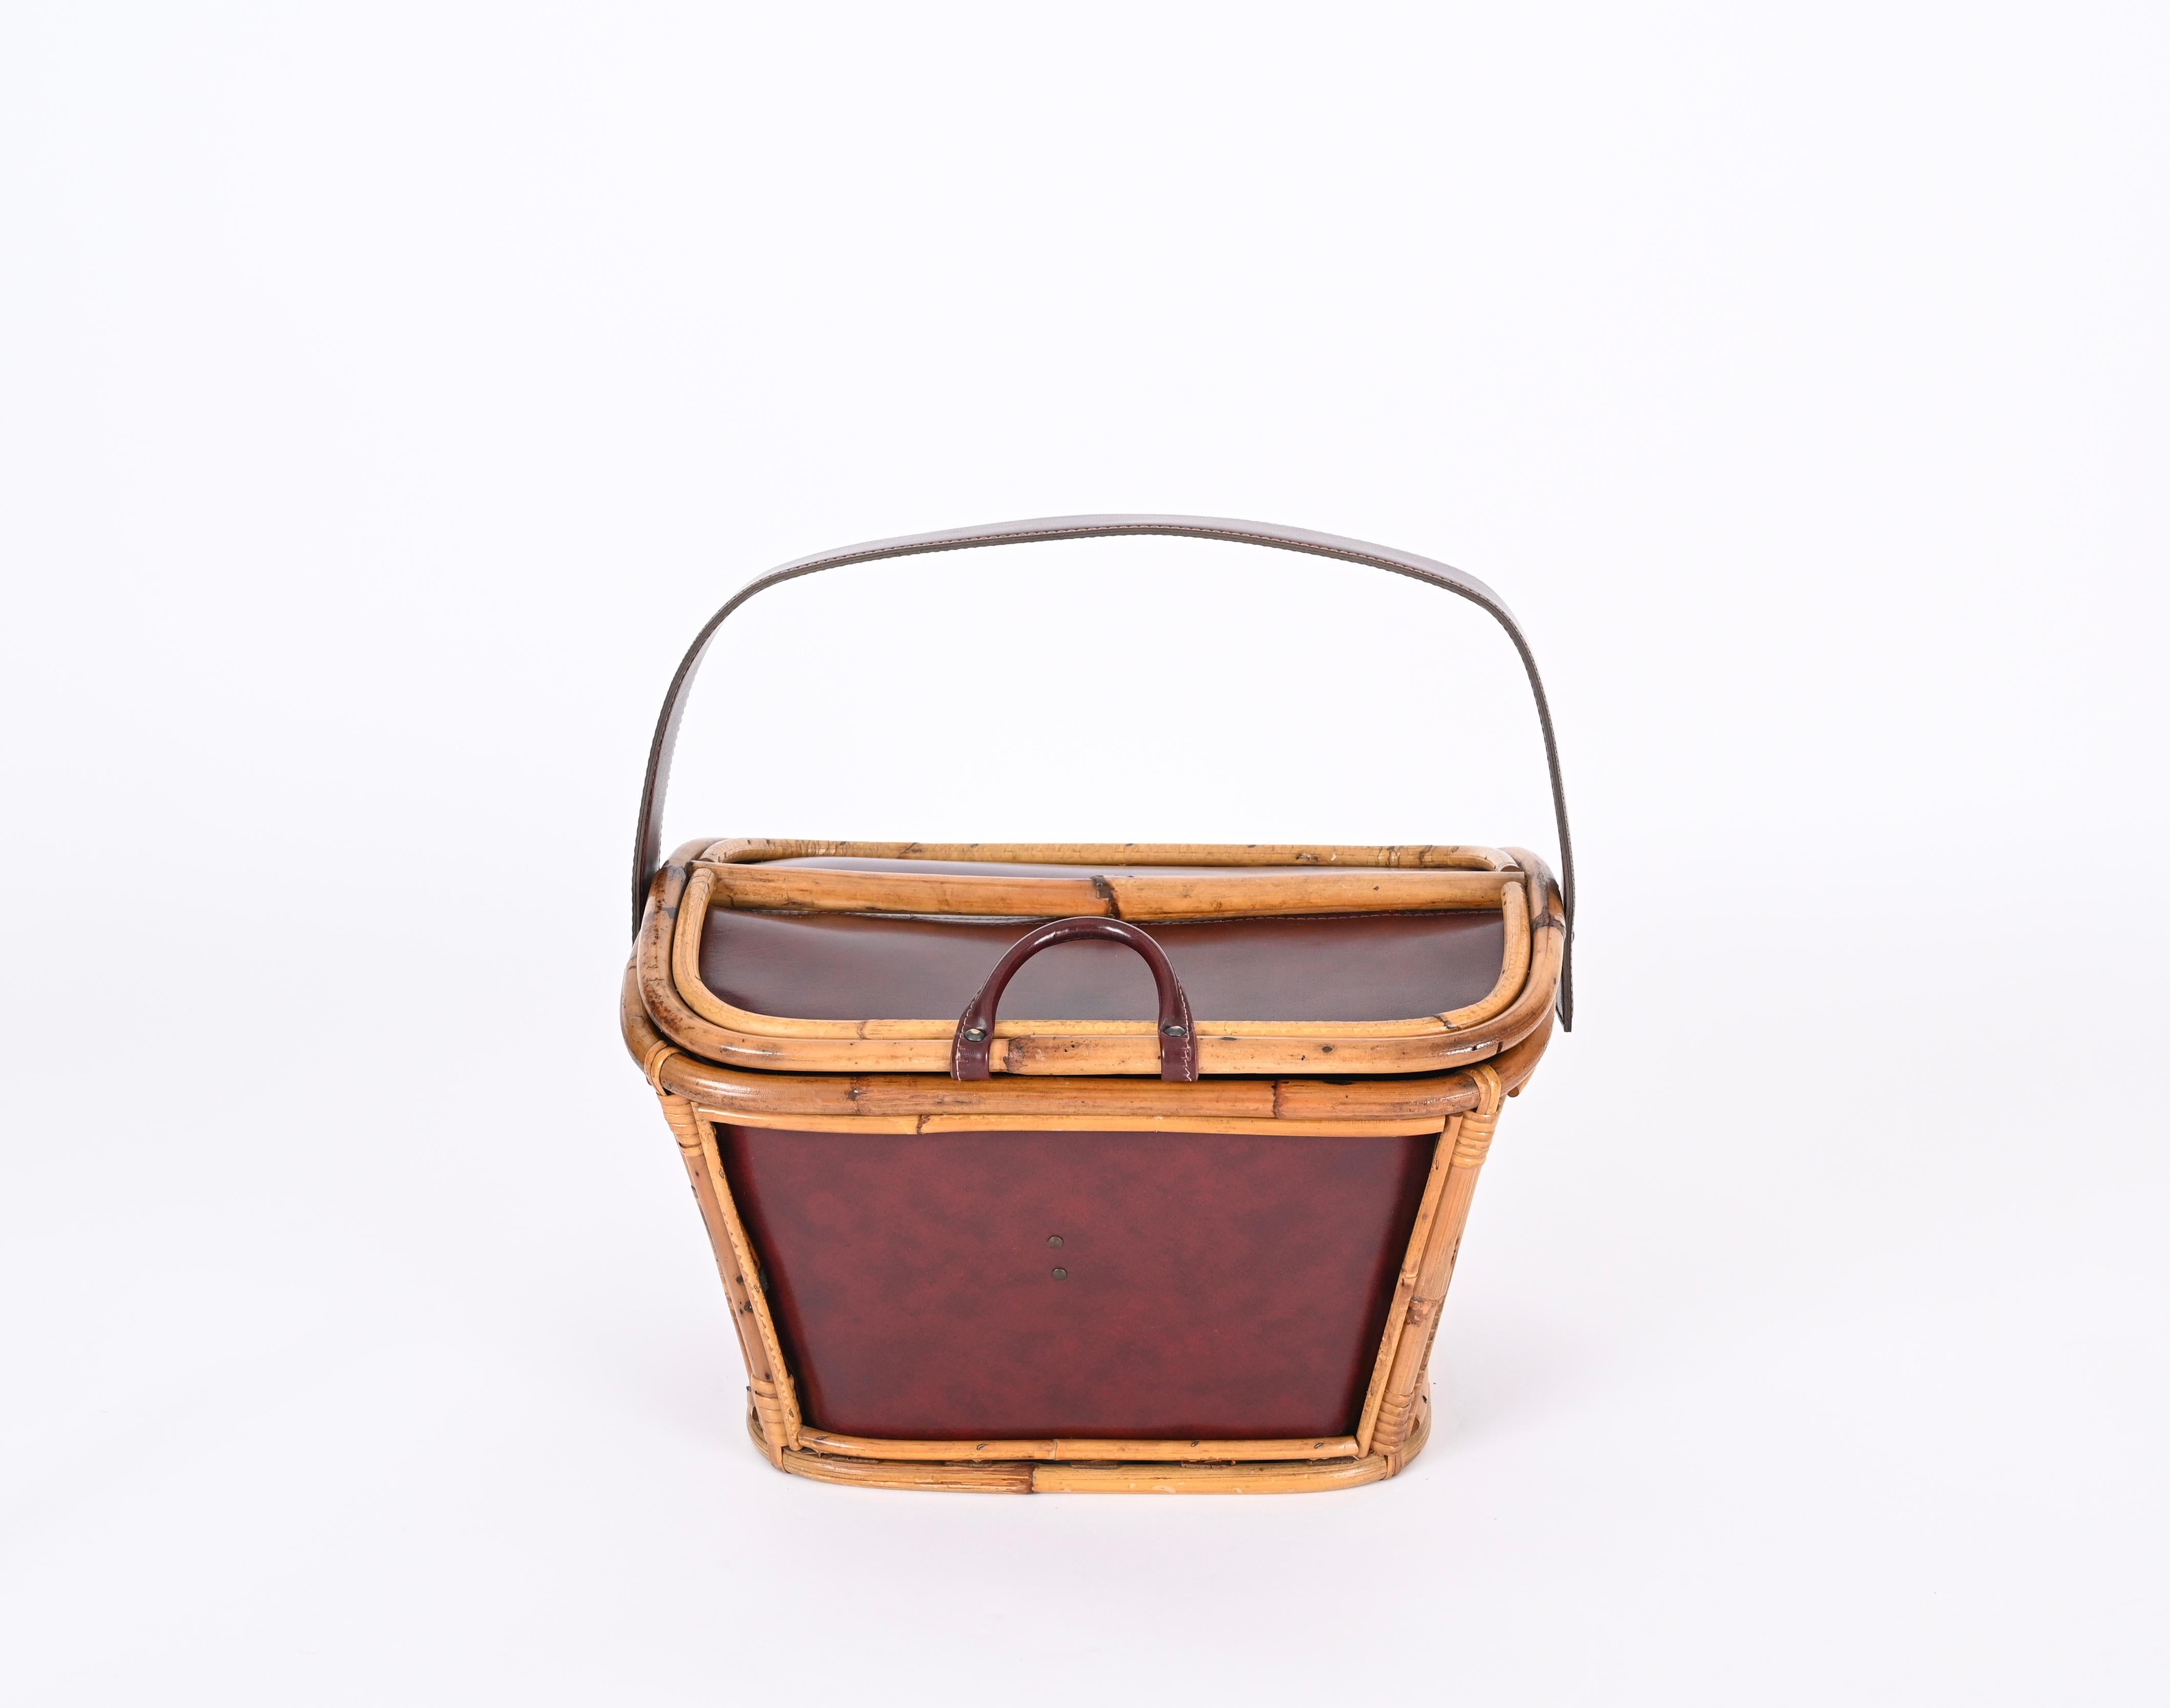 20th Century Midcentury Rattan, Wicker and Leather Italian Decorative Basket Bag, 1960s For Sale